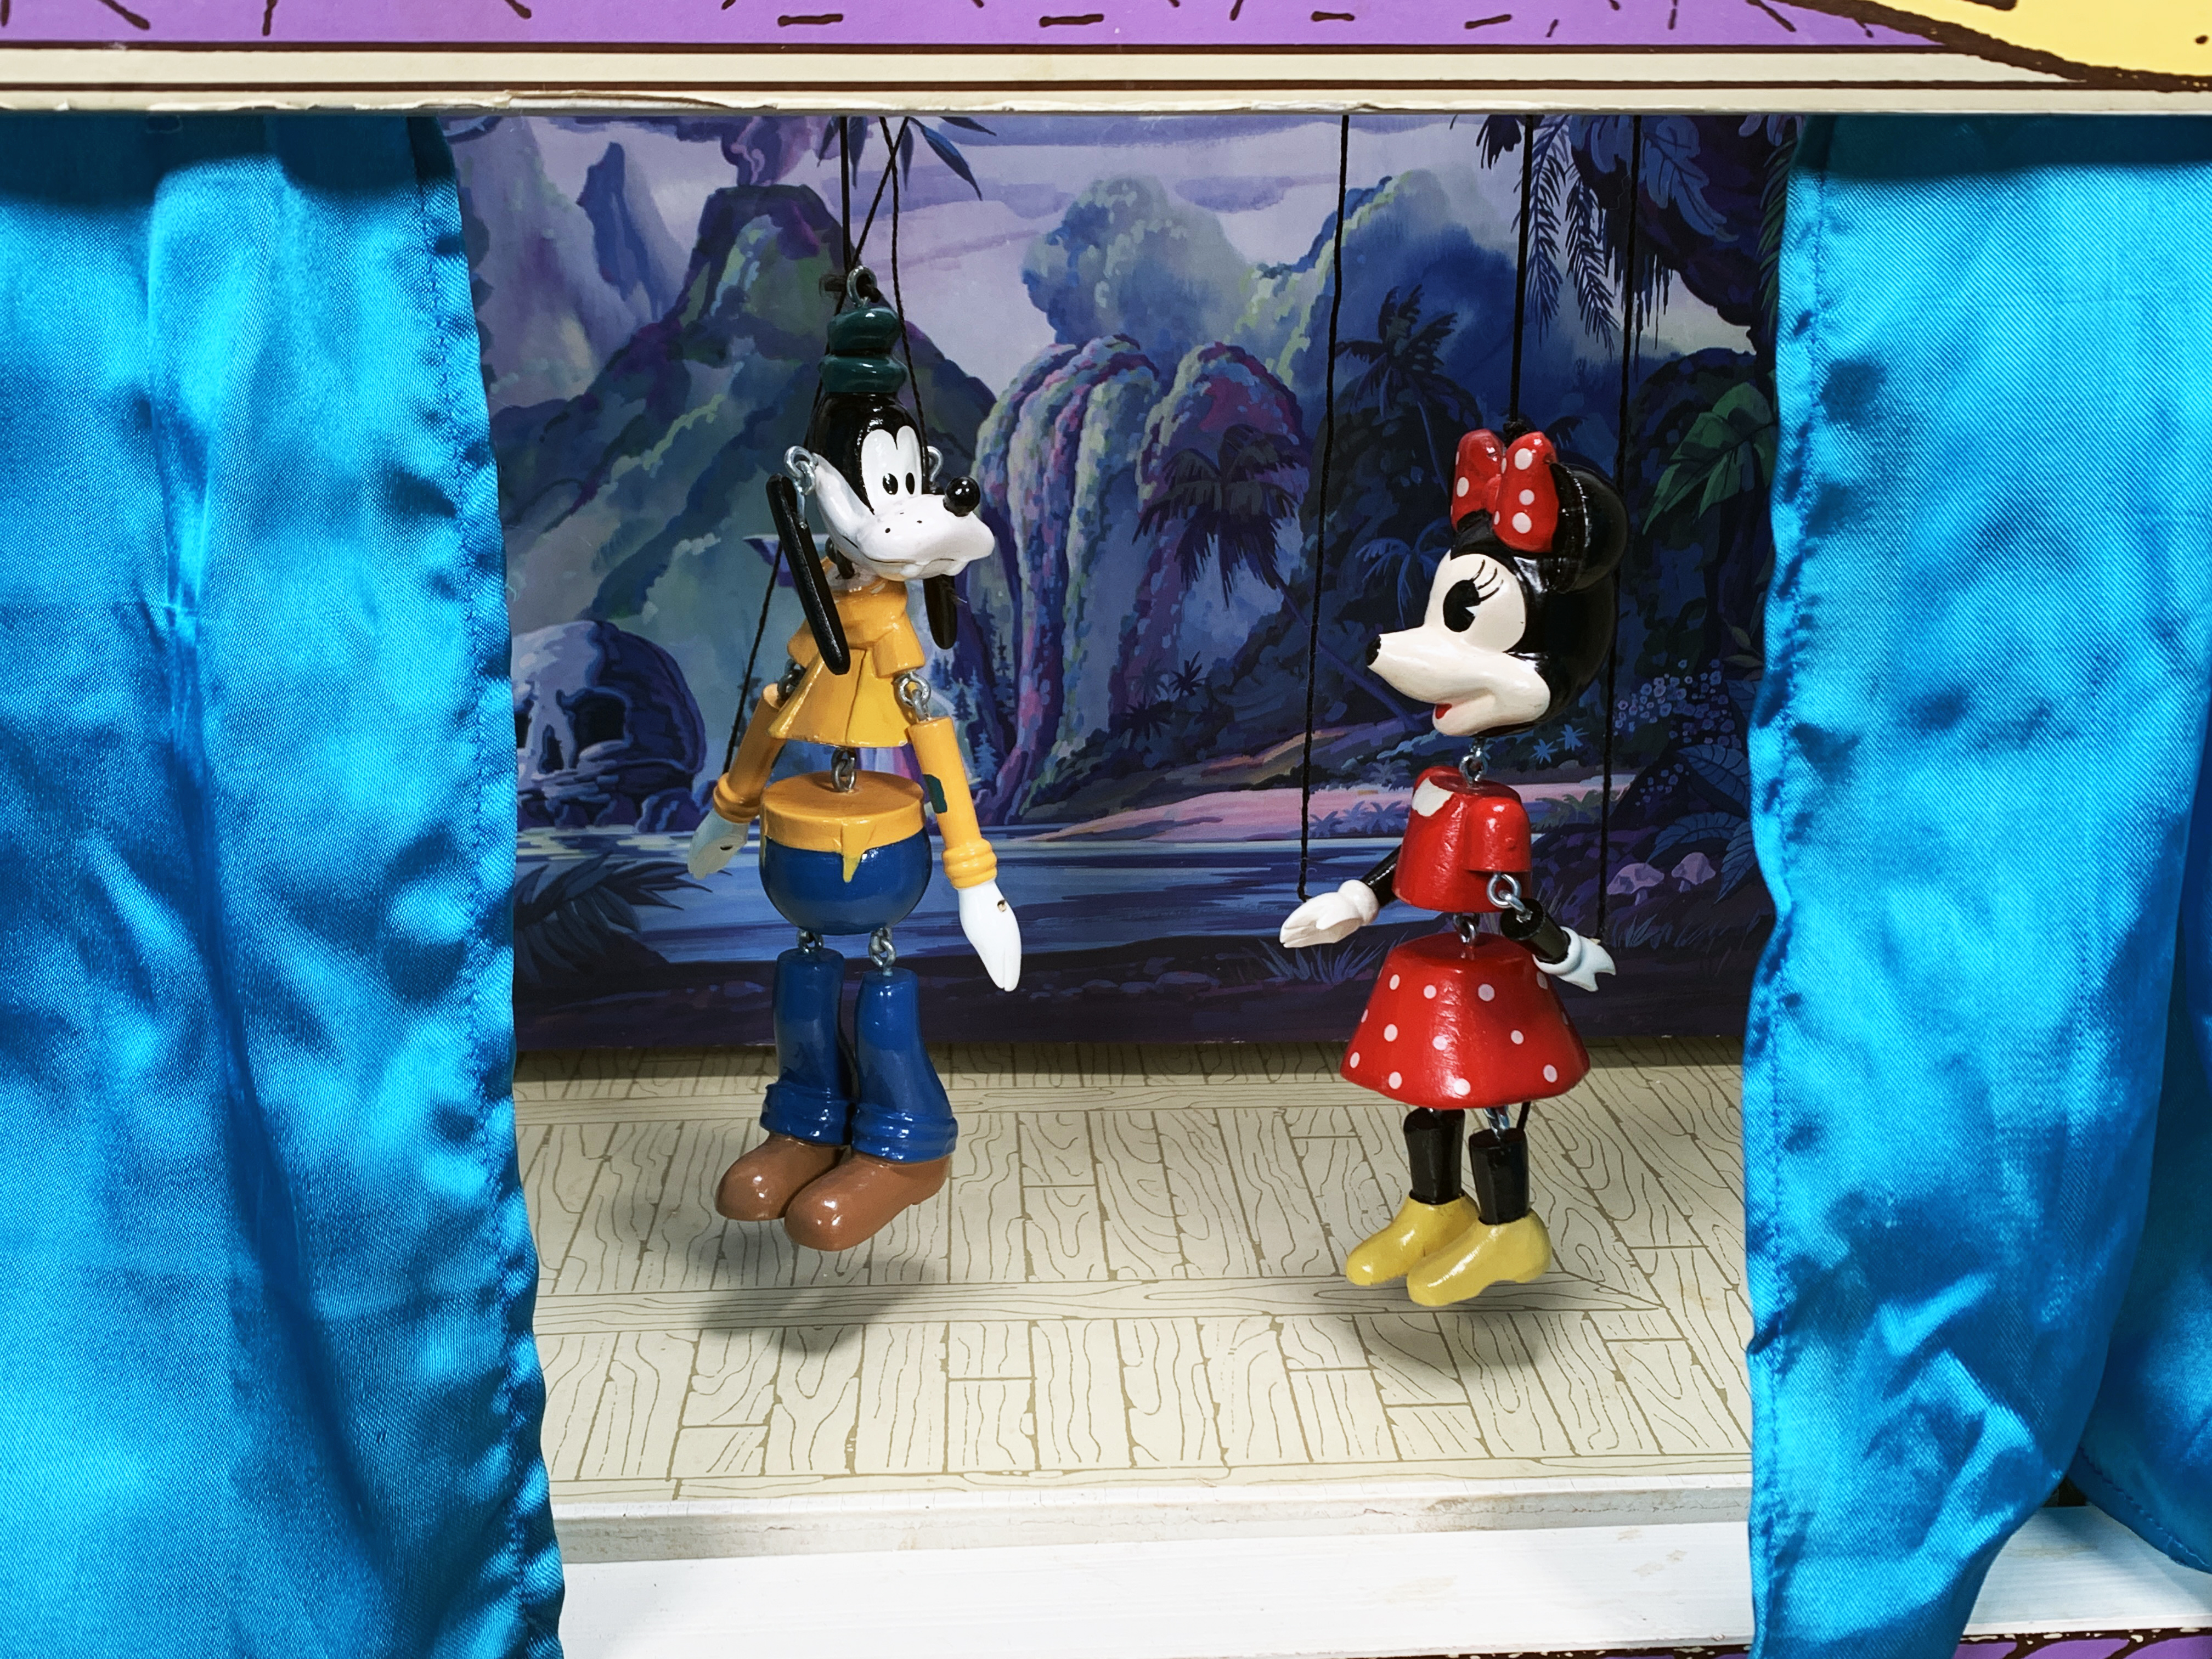 Disney Magic Puppet Theater And Marionettes image 4